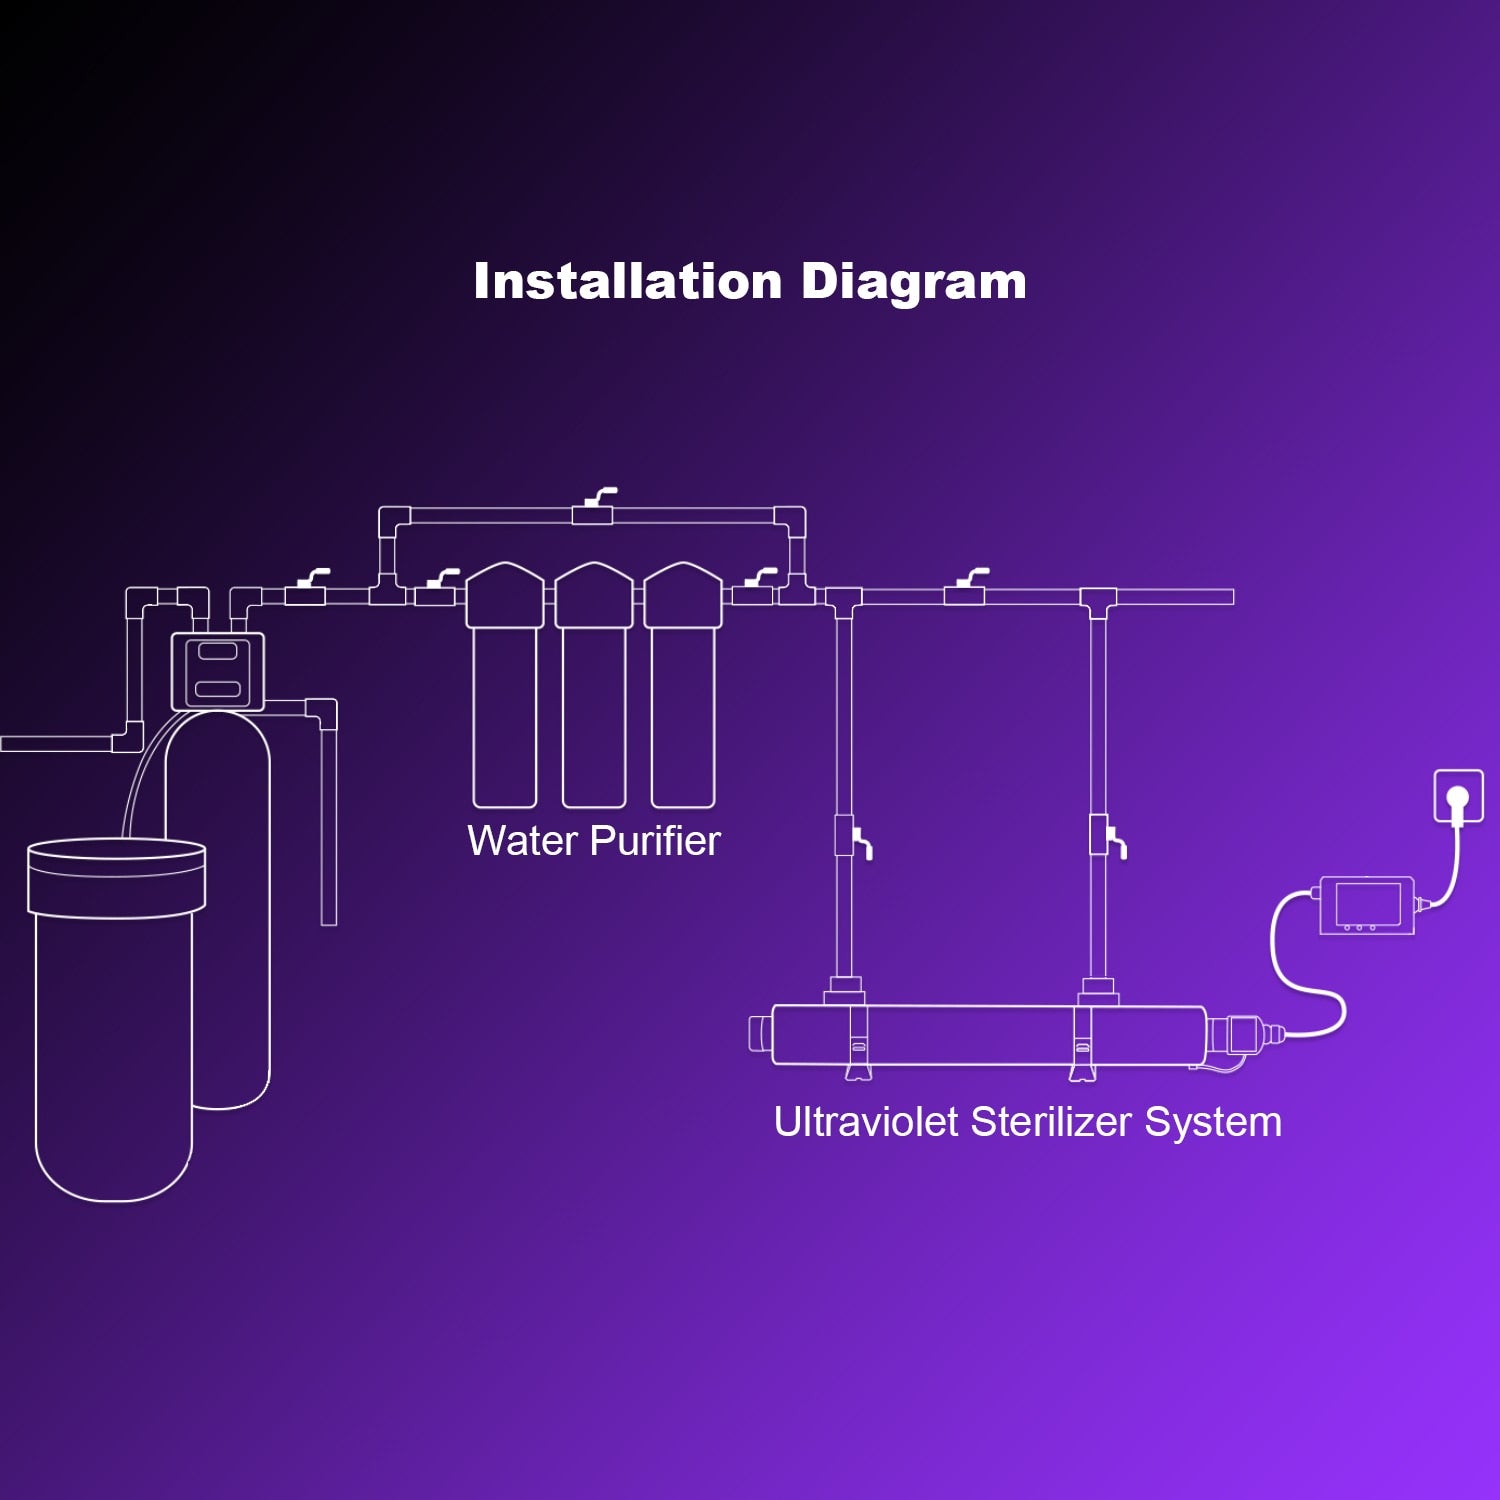 ALTHY Stainless Steel UV Water Sterilizer System Ultraviolet Tube Lamp Direct Drink Disinfection Filter Purifier 1GPM / 2GPM  Hardware > Plumbing > Water Dispensing & Filtration 203.99 EZYSELLA SHOP